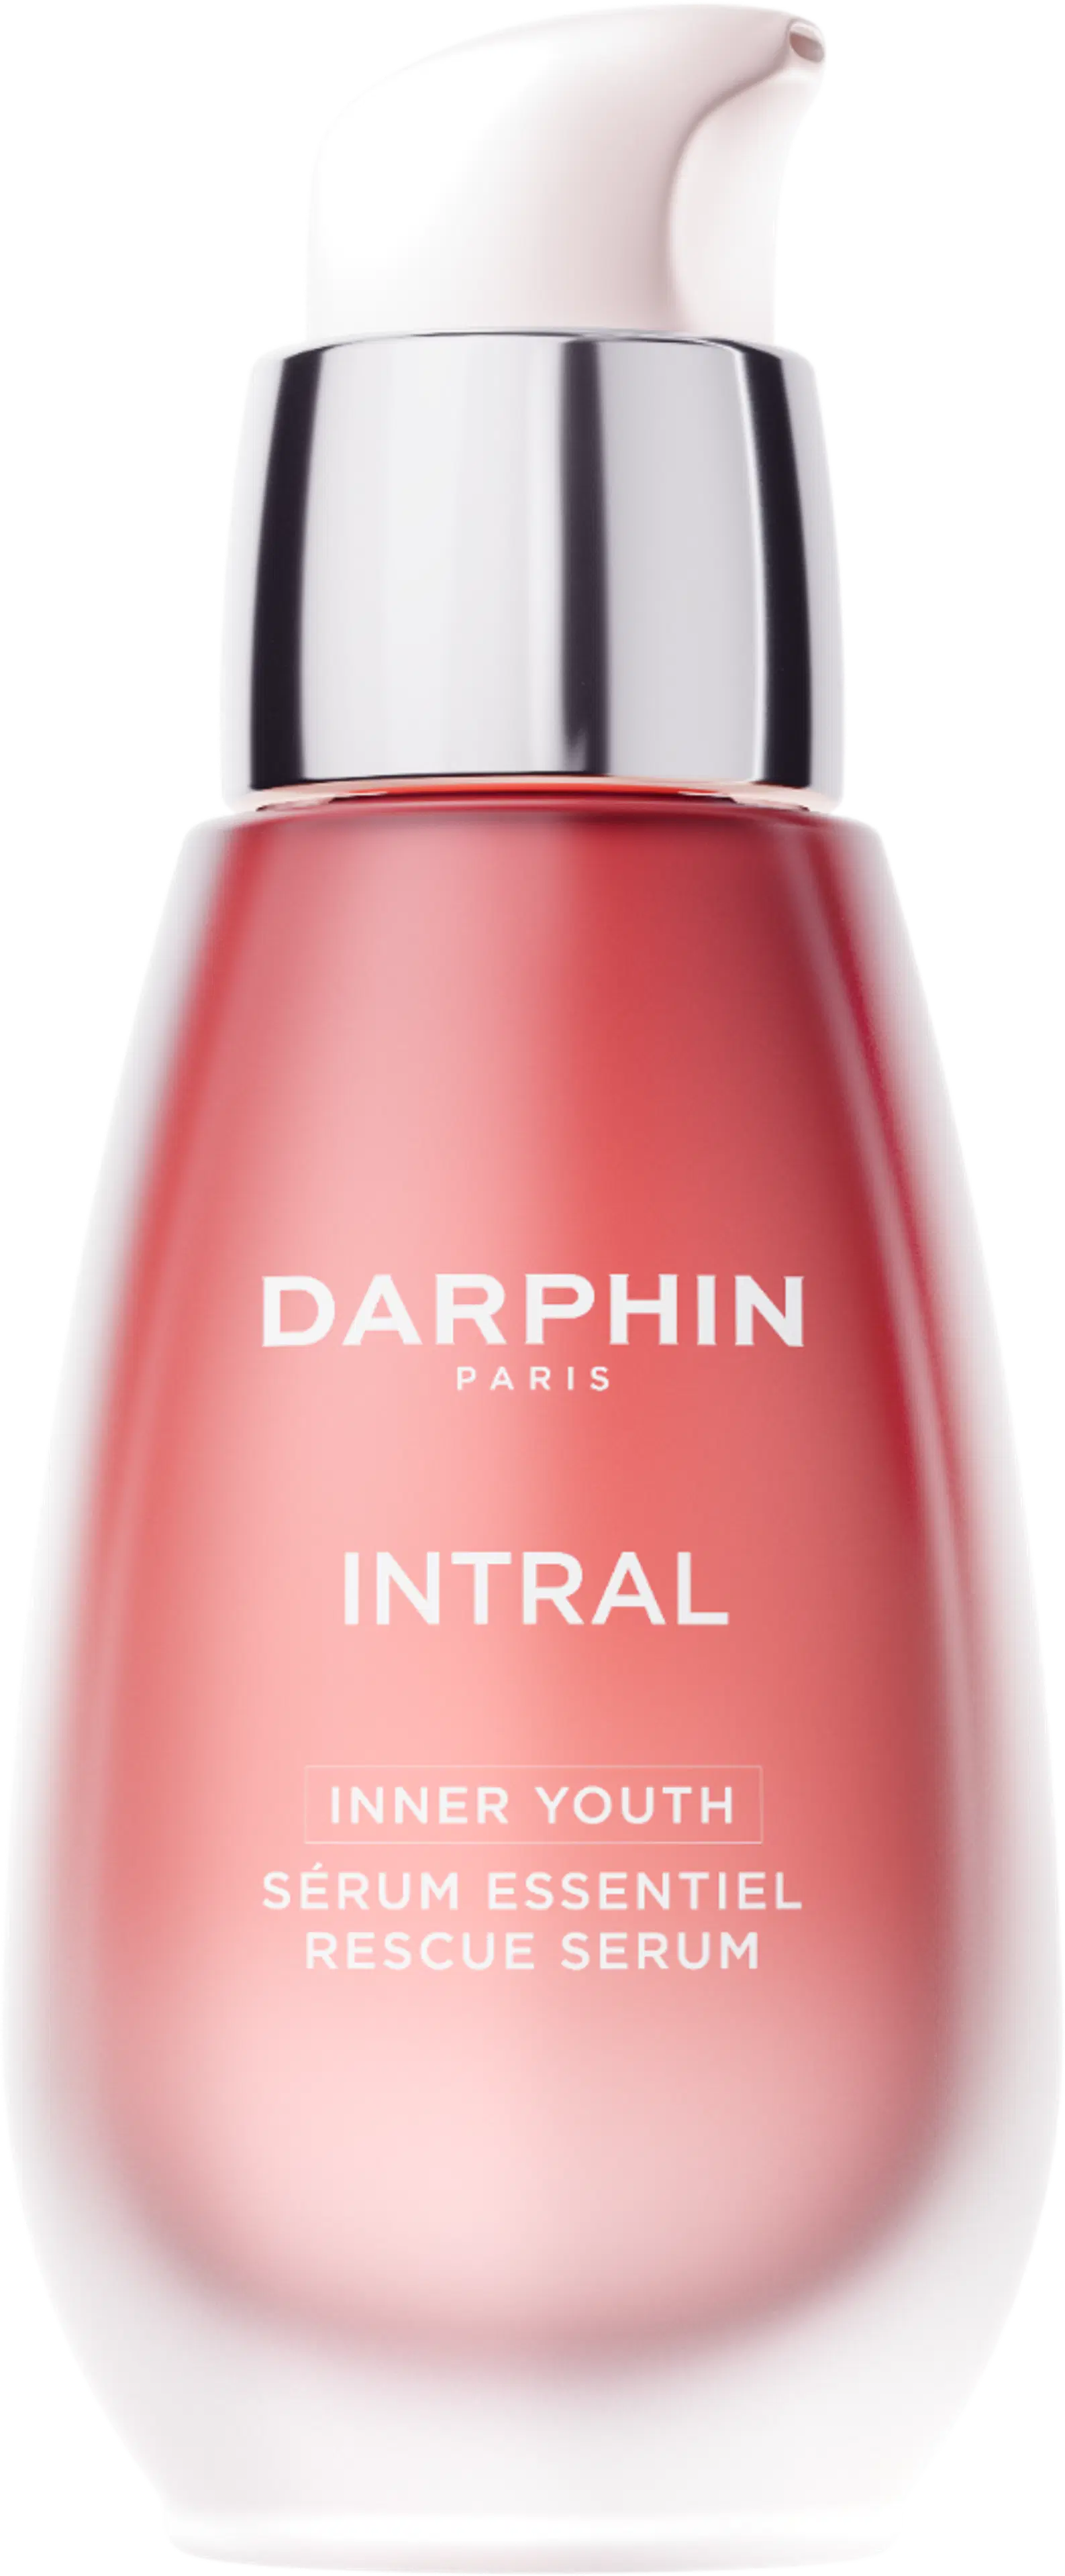 Darphin Intral Inner Youth Rescue Seerumi 30 ml